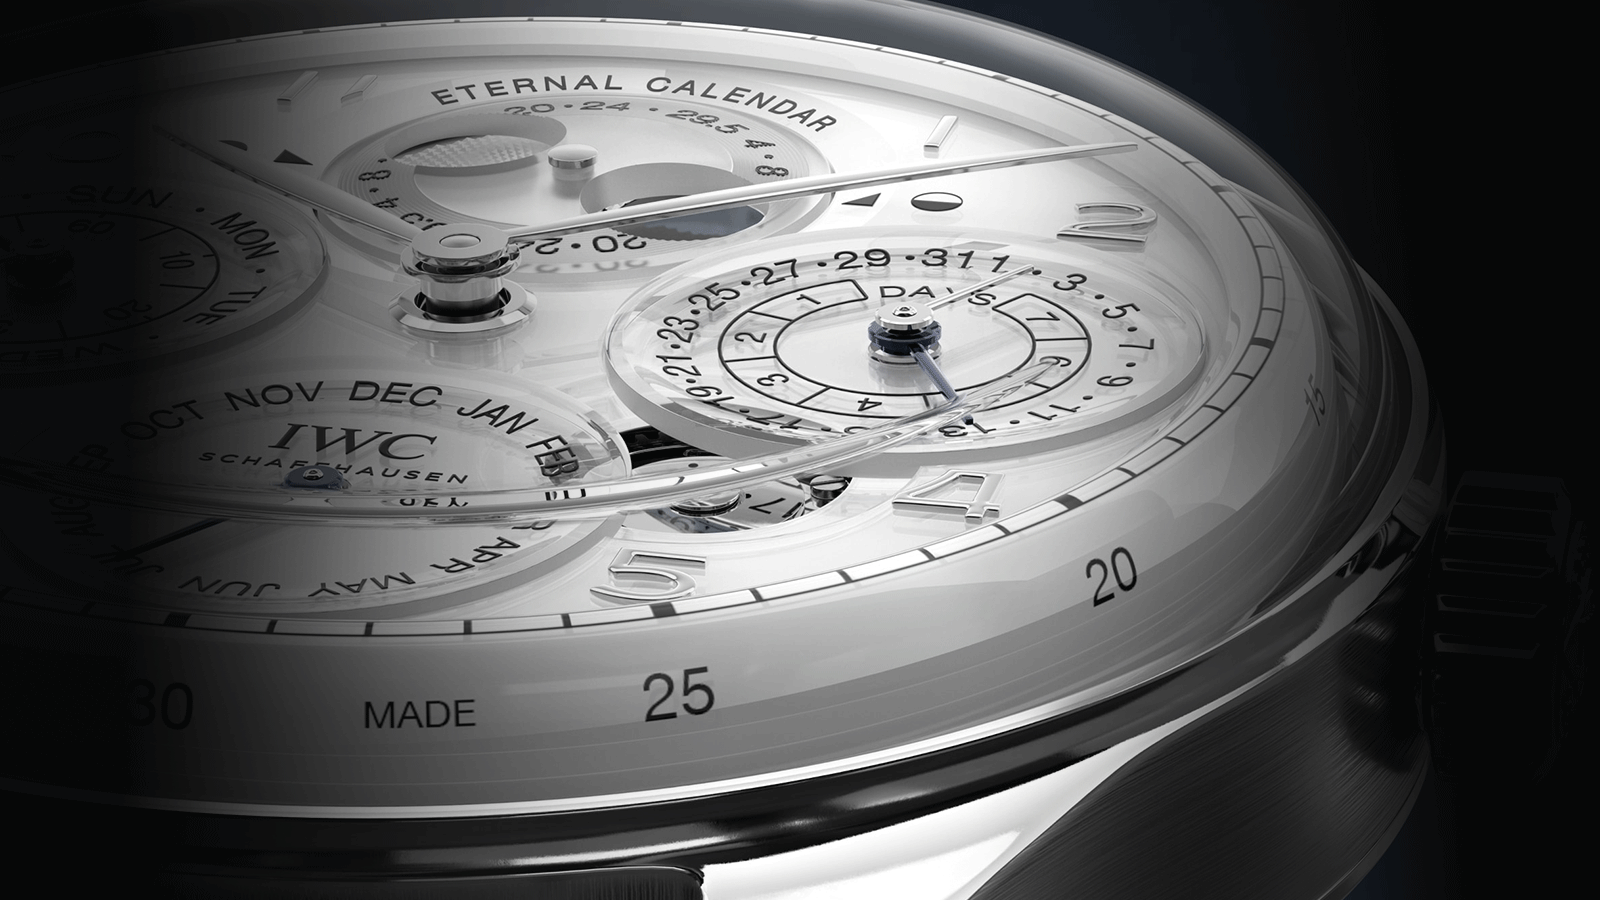 The Portugieser Eternal Calendar features an intricately finished platinum case with polished and brushed surfaces. Another highlight is the glass dial, which is manufactured in a complex process. 